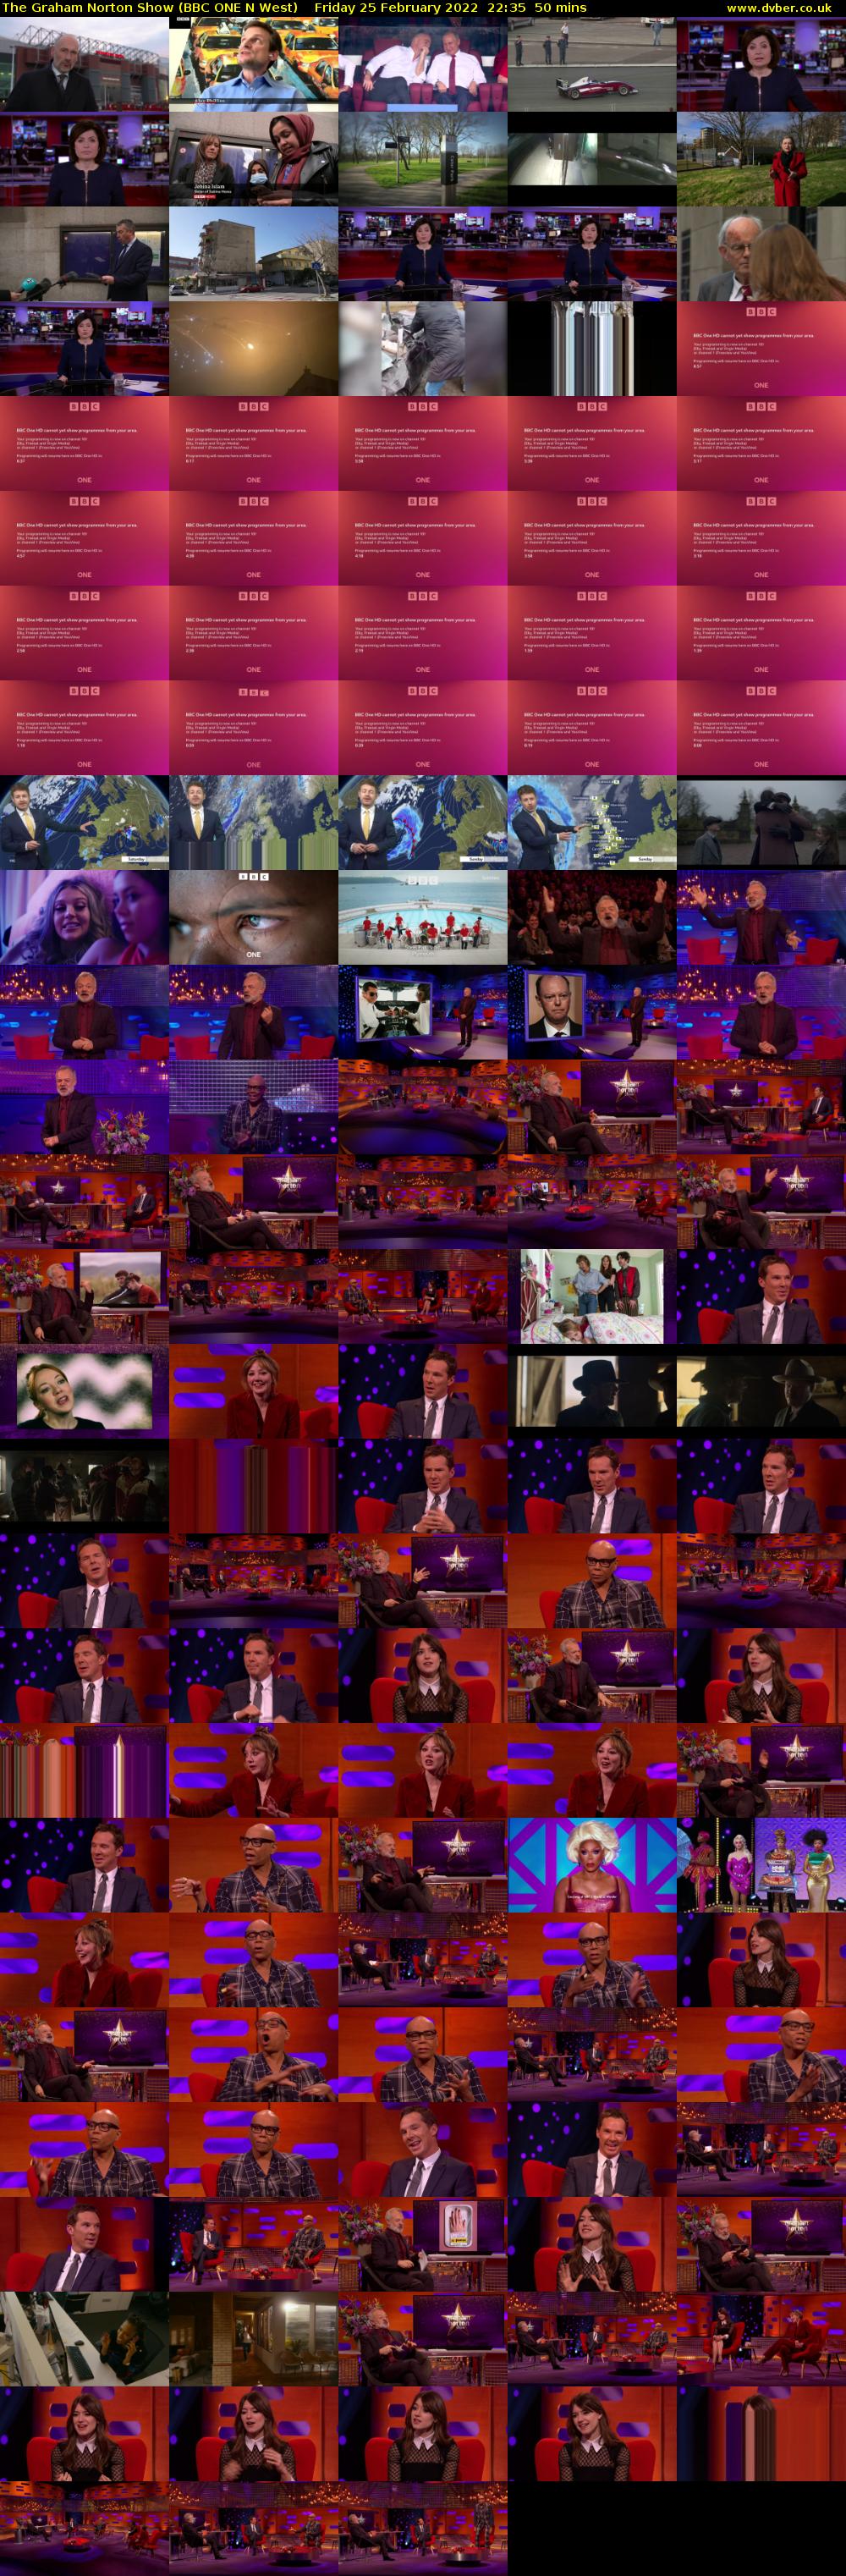 The Graham Norton Show (BBC ONE N West) Friday 25 February 2022 22:35 - 23:25